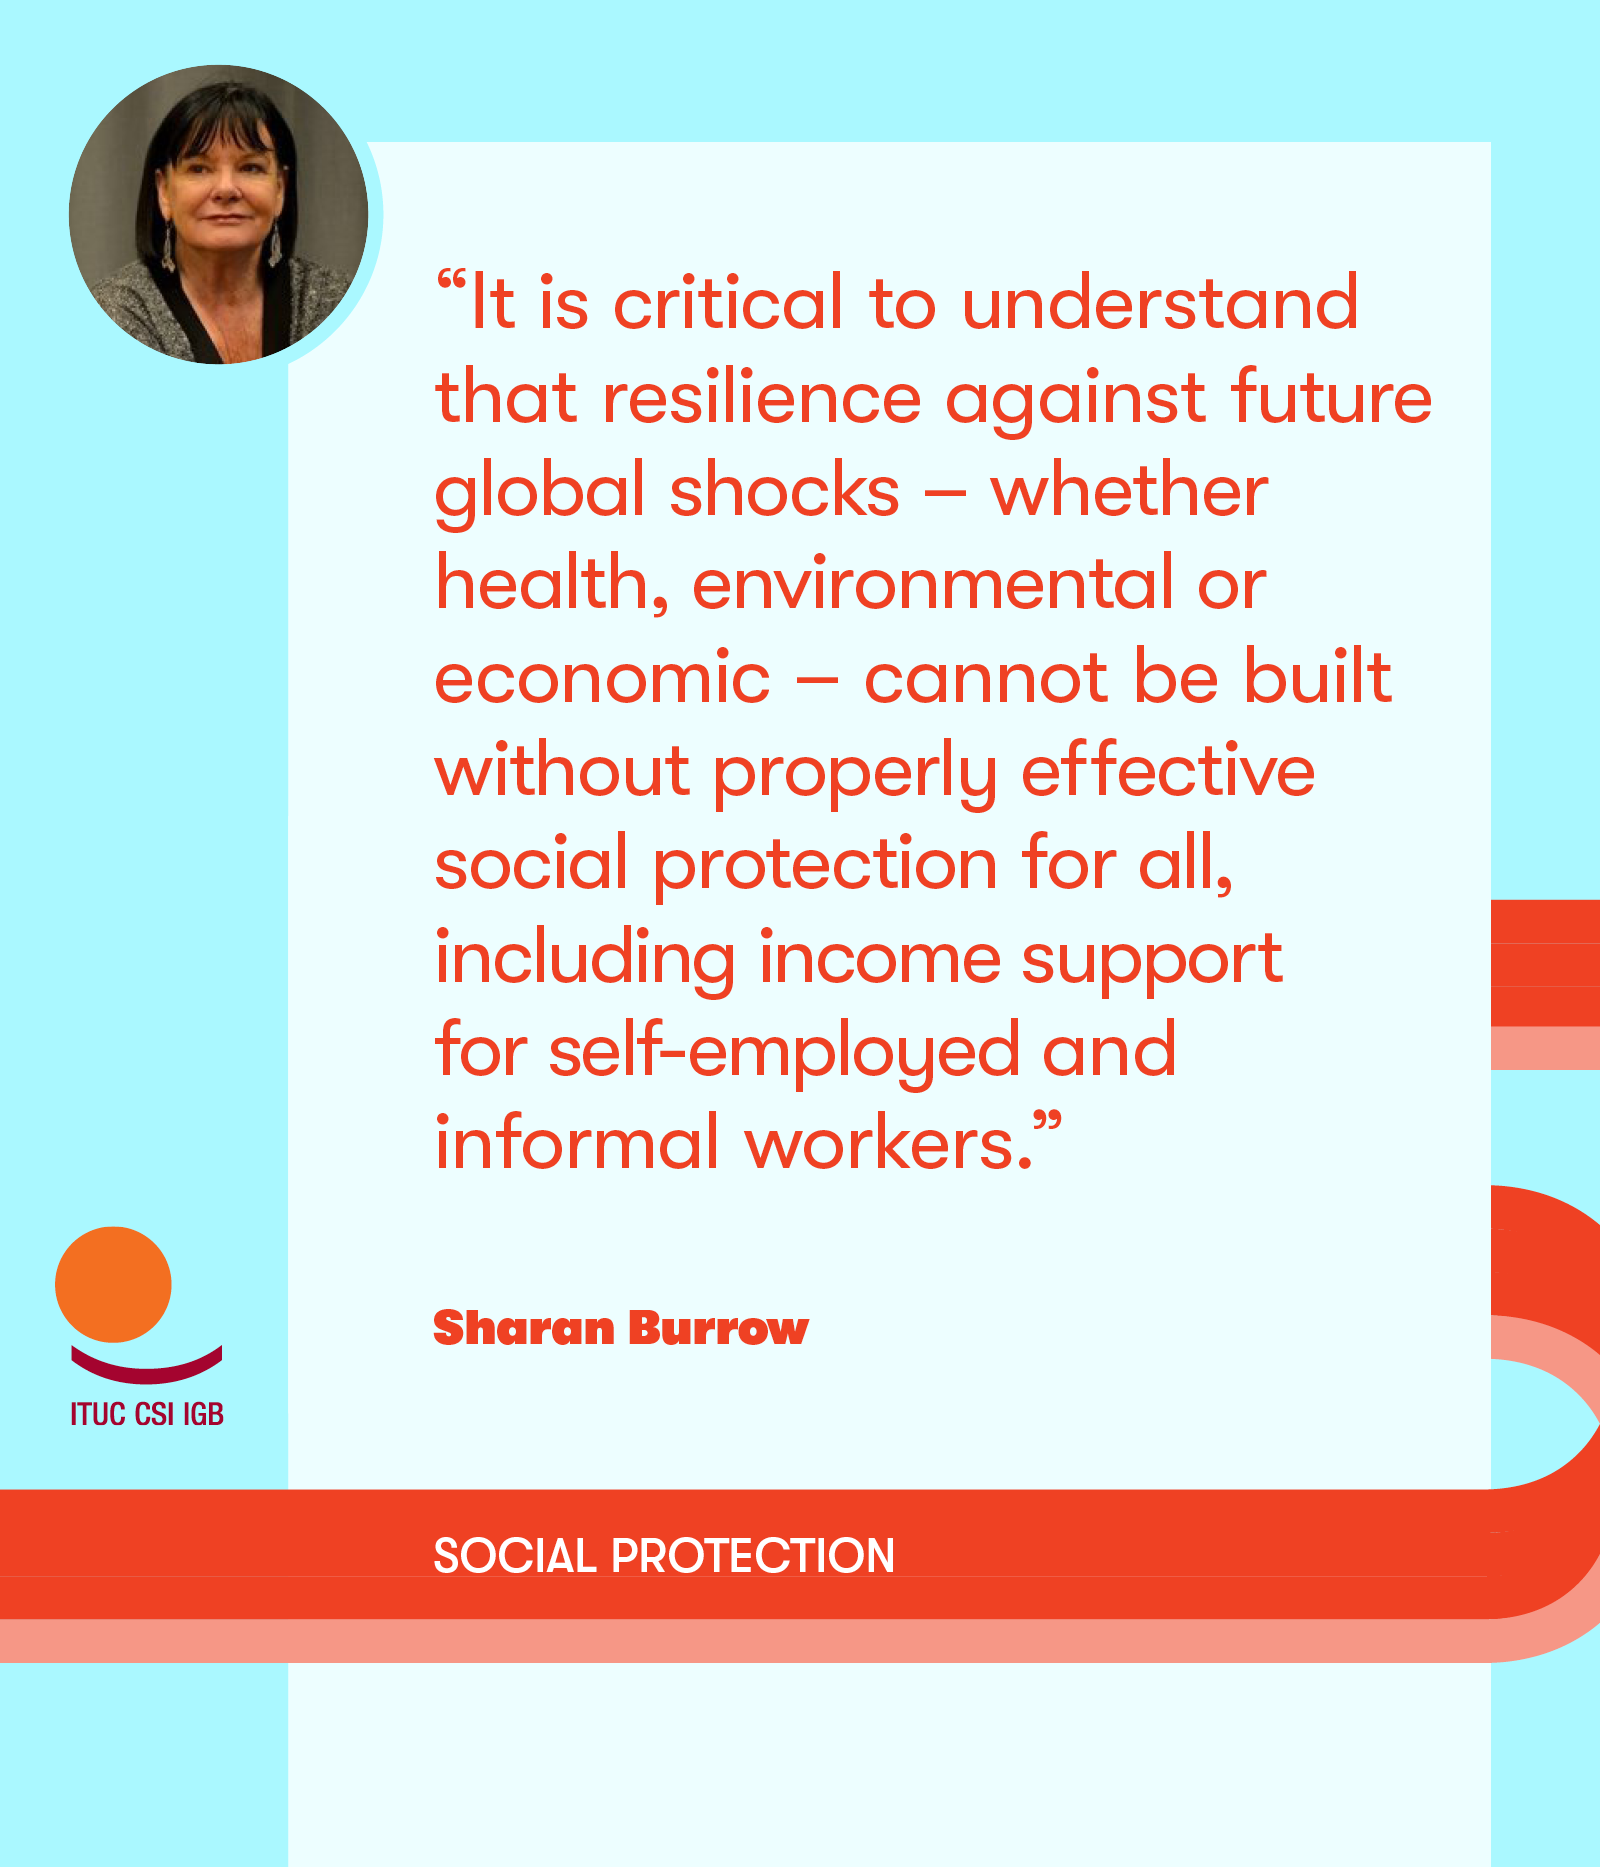 Website_ITUC_NewSocialContract_Images2.png